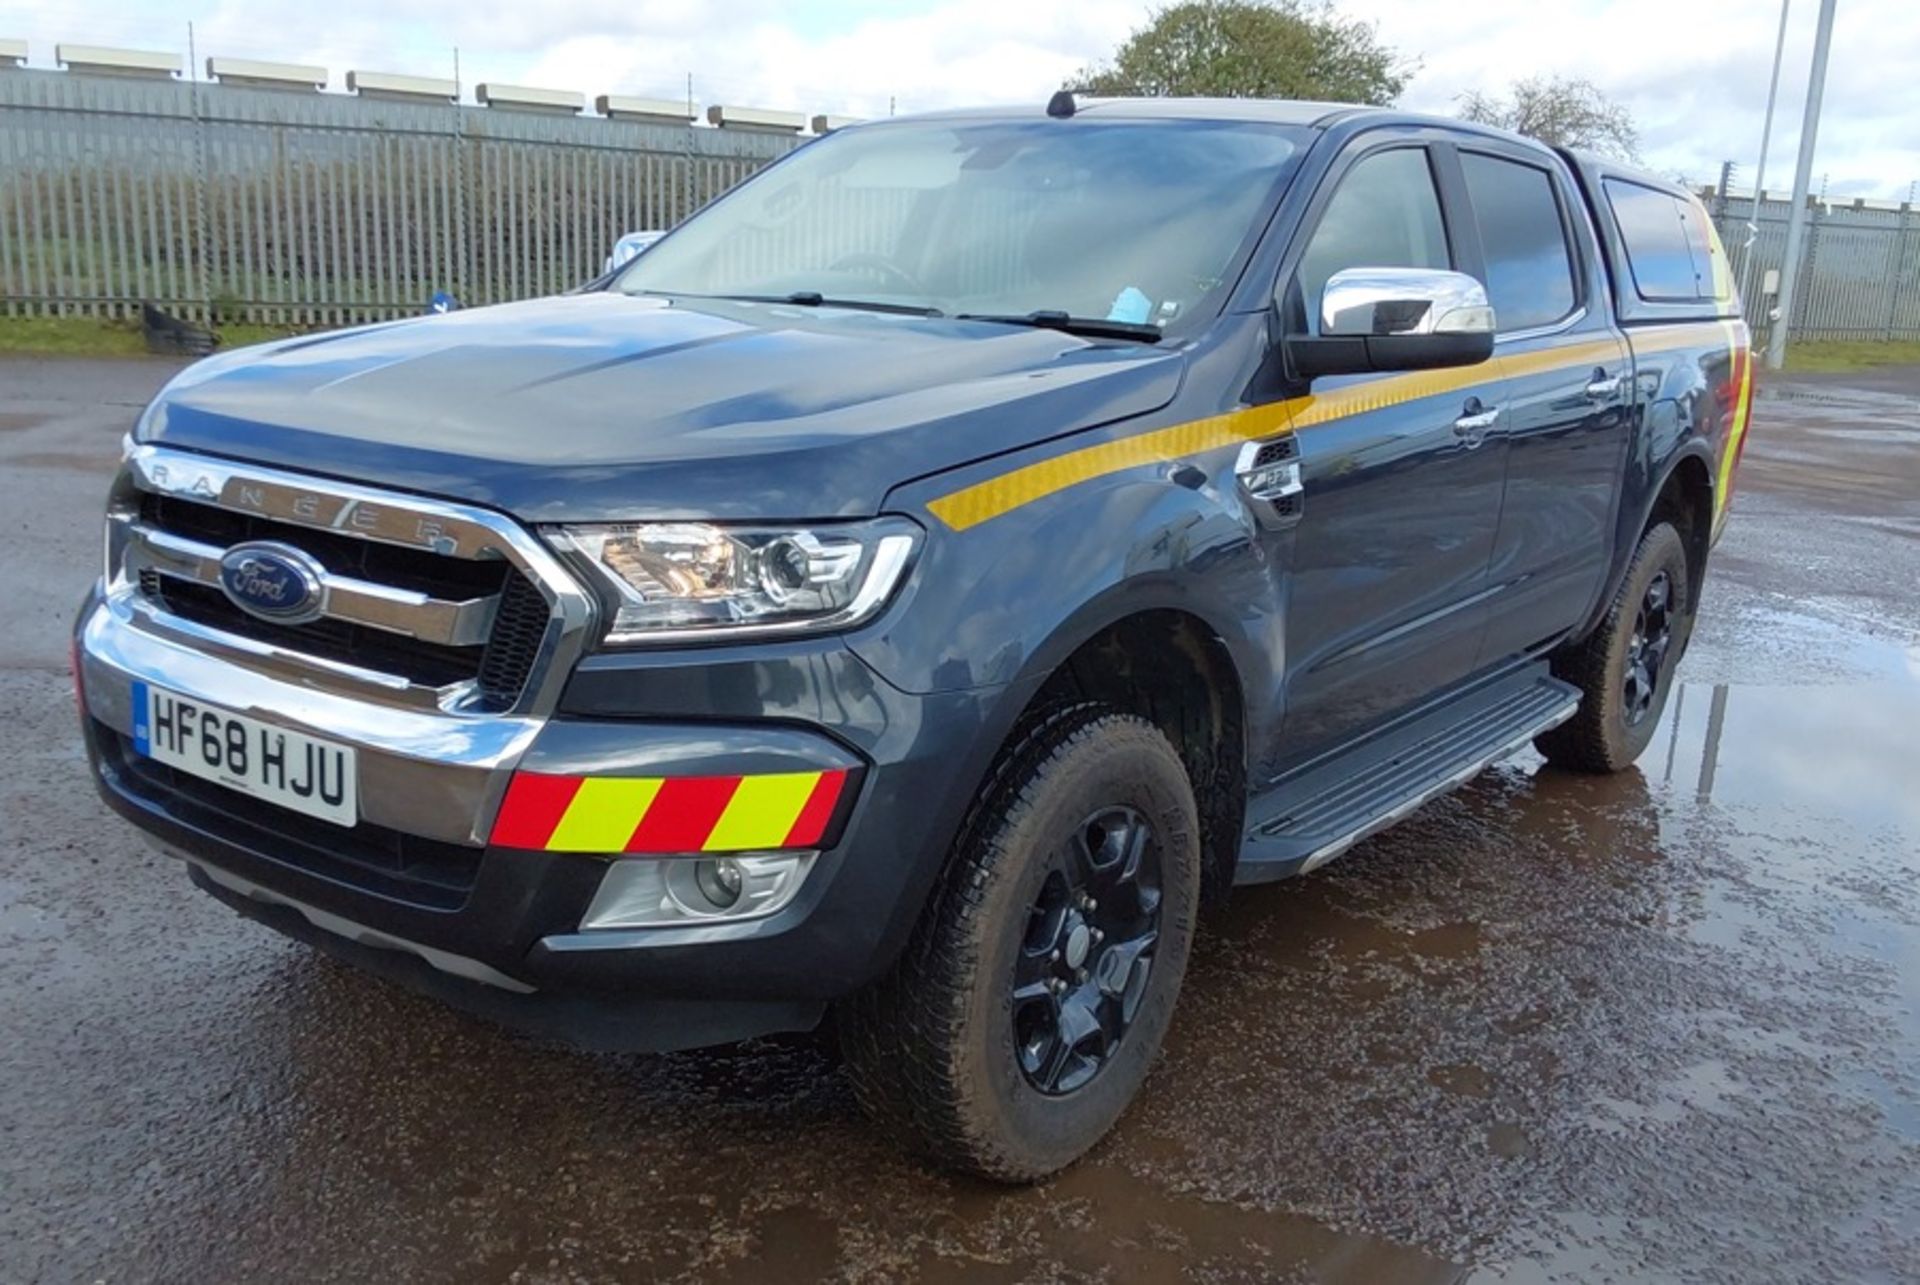 2018/68 REG FORD RANGER LIMITED 4X4 DCB TDCI 2.2 DIESEL MANUAL PICK UP, SHOWING 2 FORMER KEEPERS - Image 2 of 8